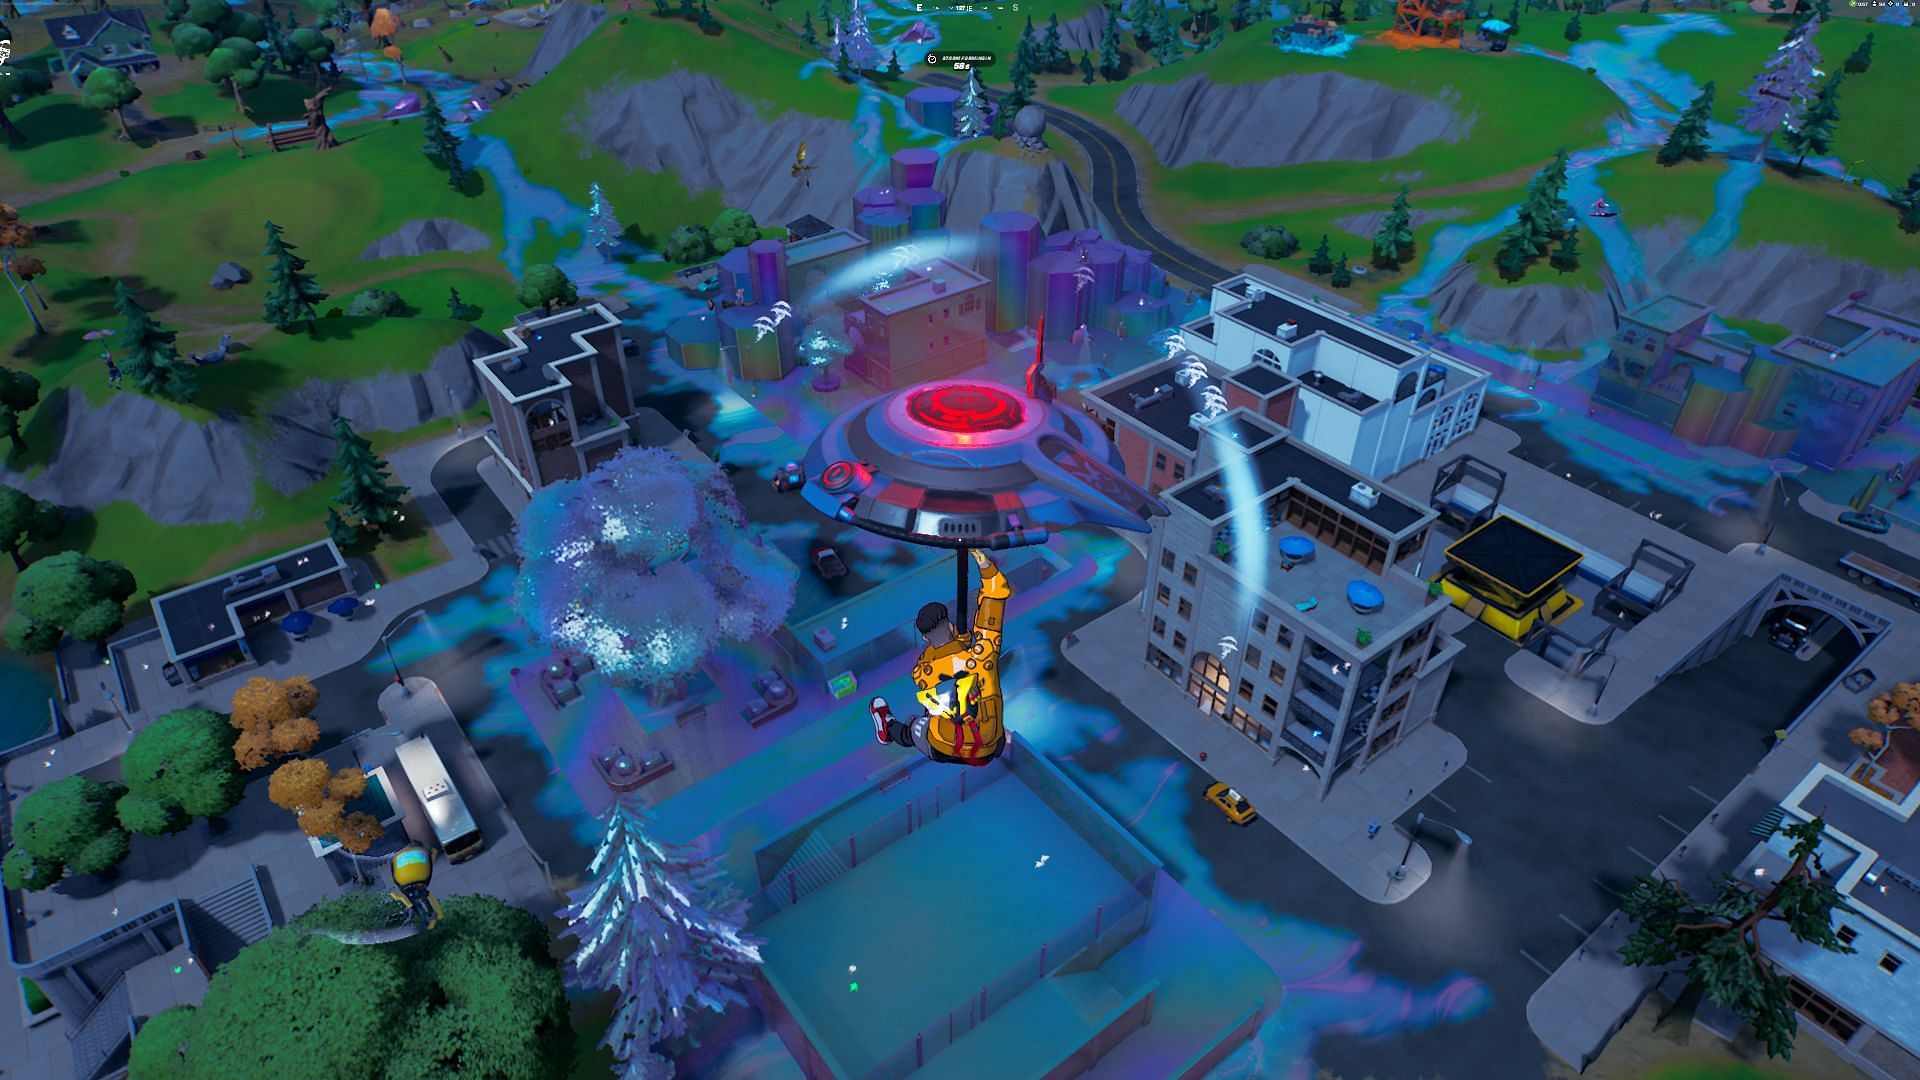 Tainted Towers is the hottest POI on the island (image via Epic Games/Fortnite)